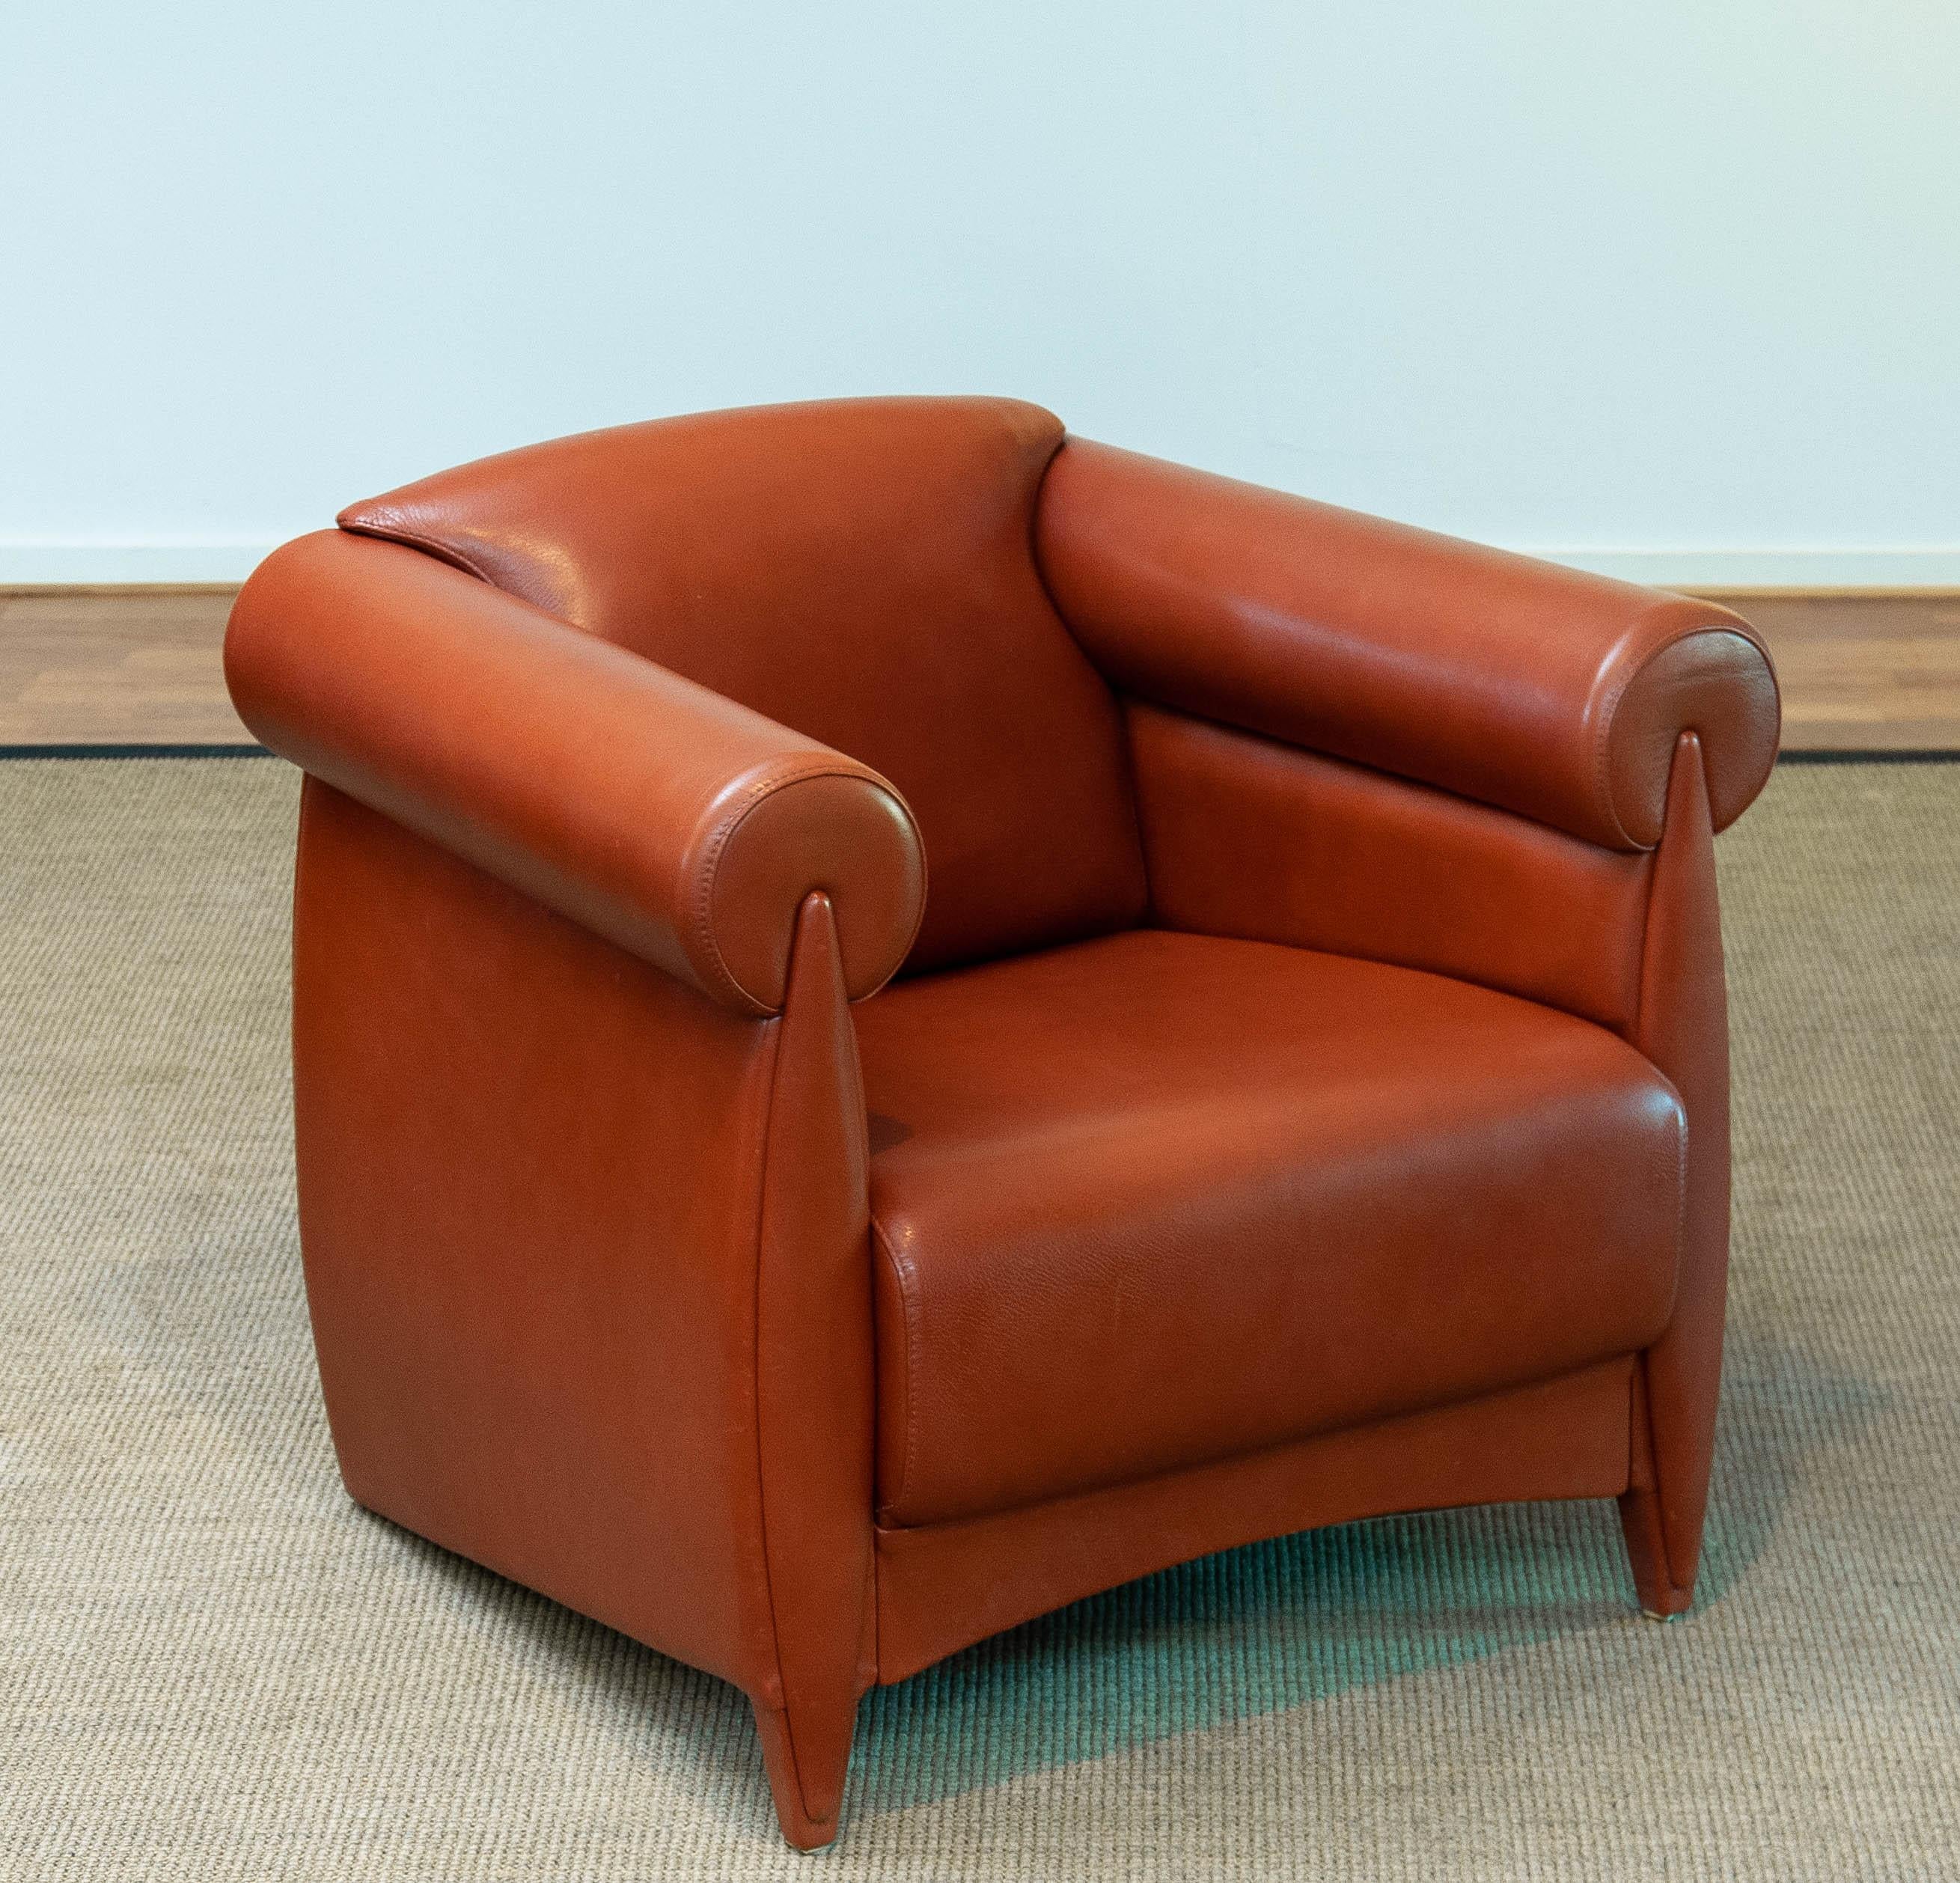 1980s Modern Lounge / Club Chair in Cognac Leather by Klaus Wettergren Denmark For Sale 6